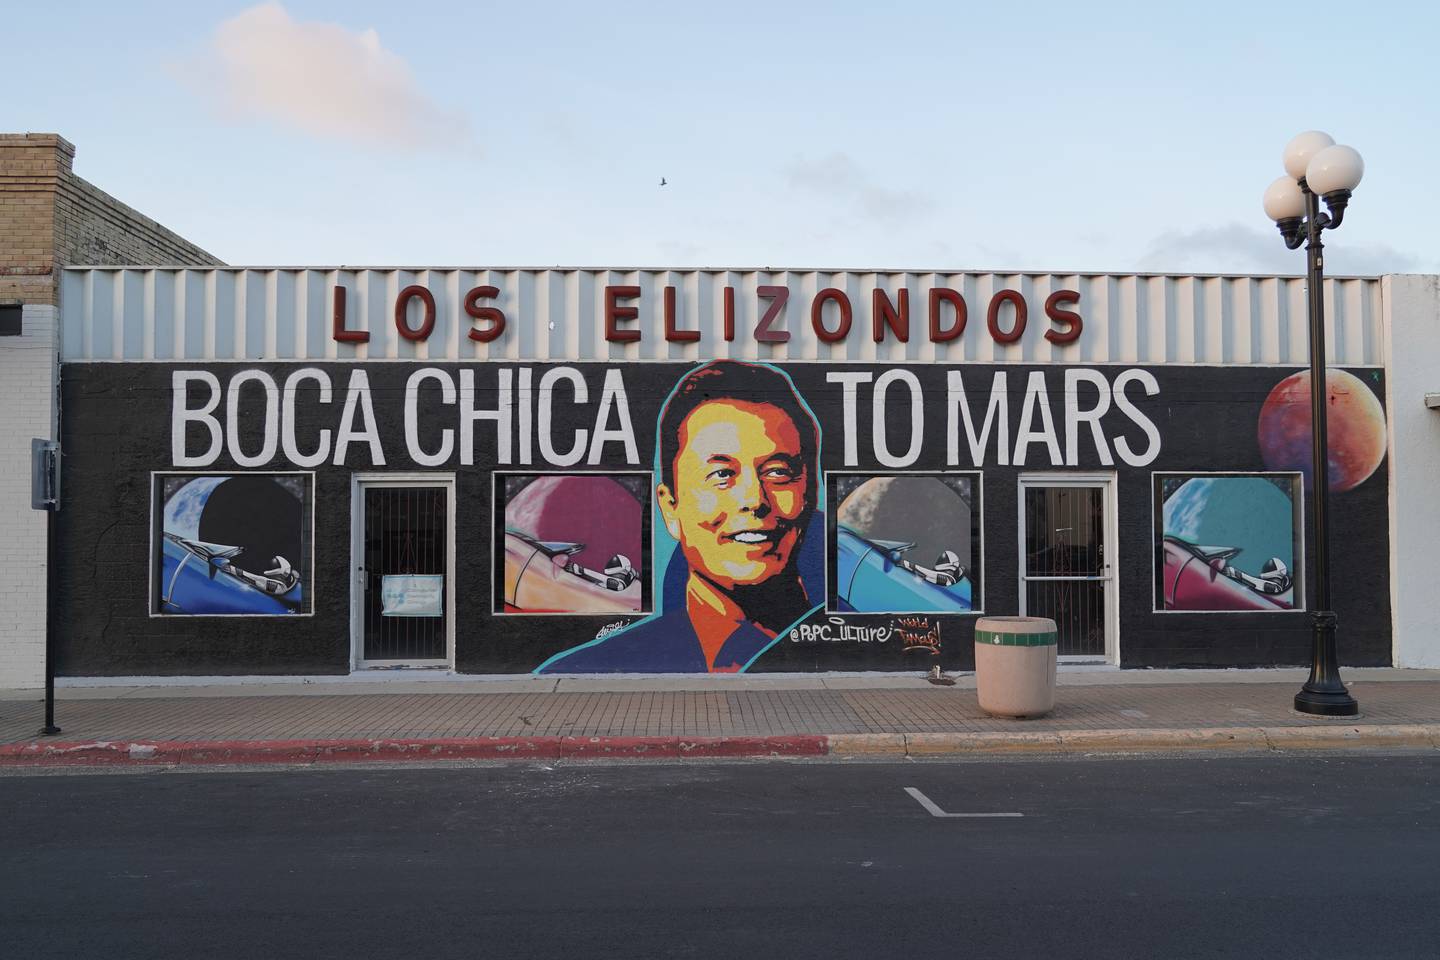 Elon Musk has not landed quietly in Brownsville. Photo: Willy Lowry/The National 